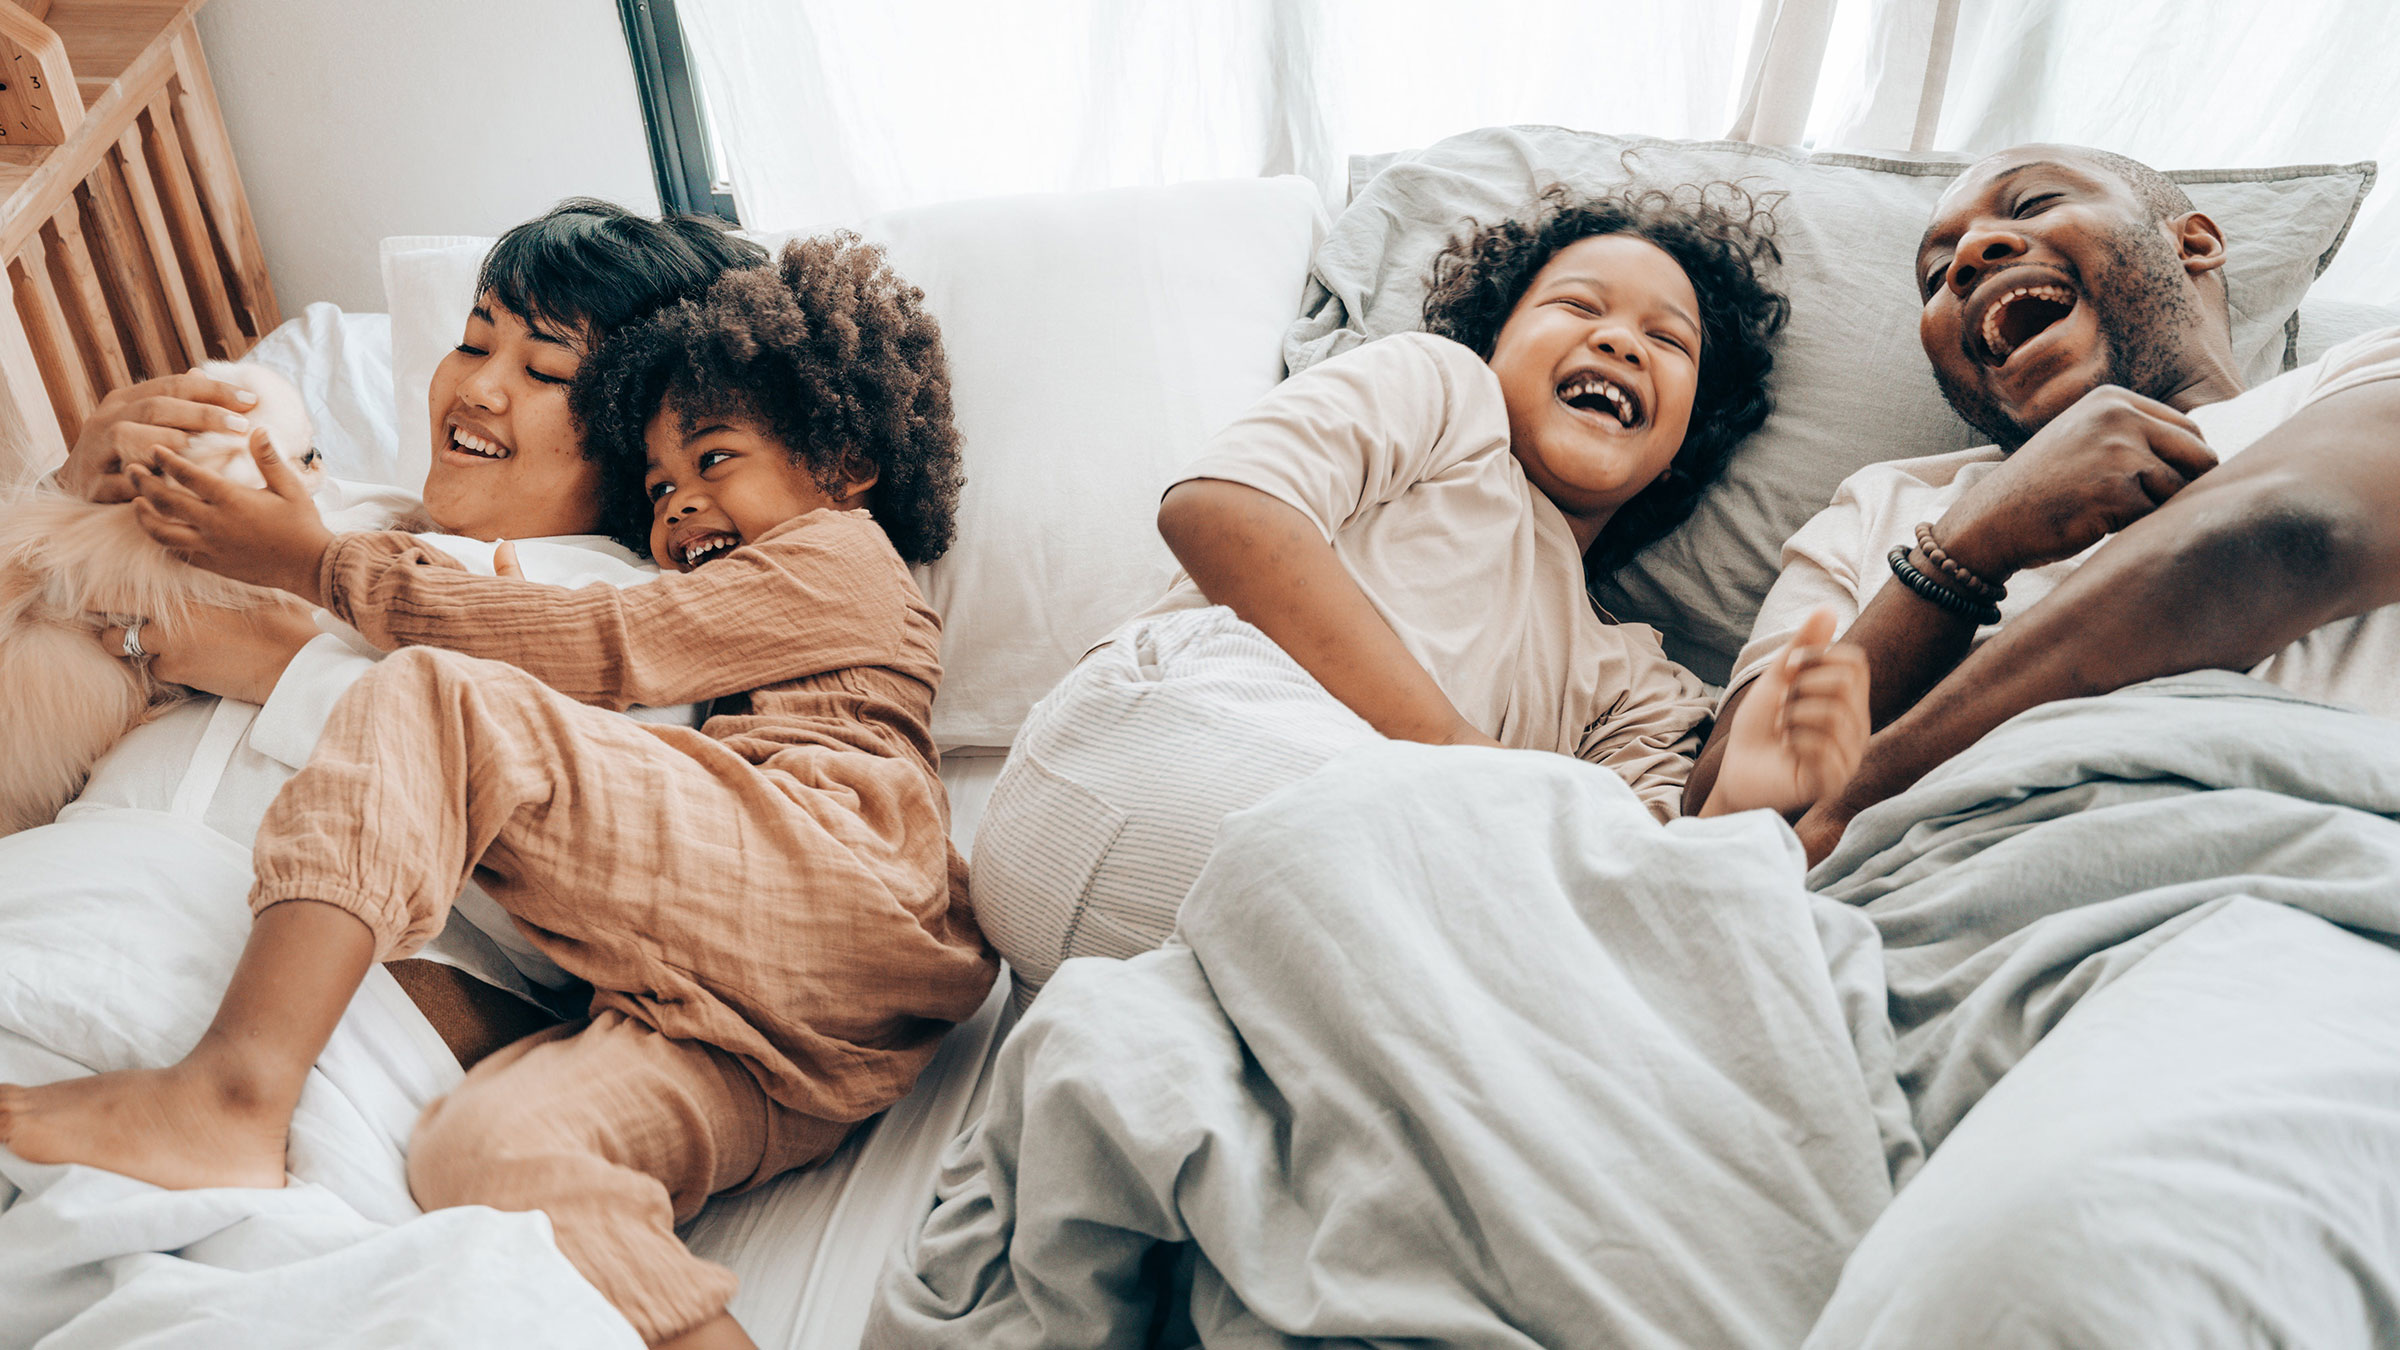 Multiracial family cuddles and laughs together on a bed